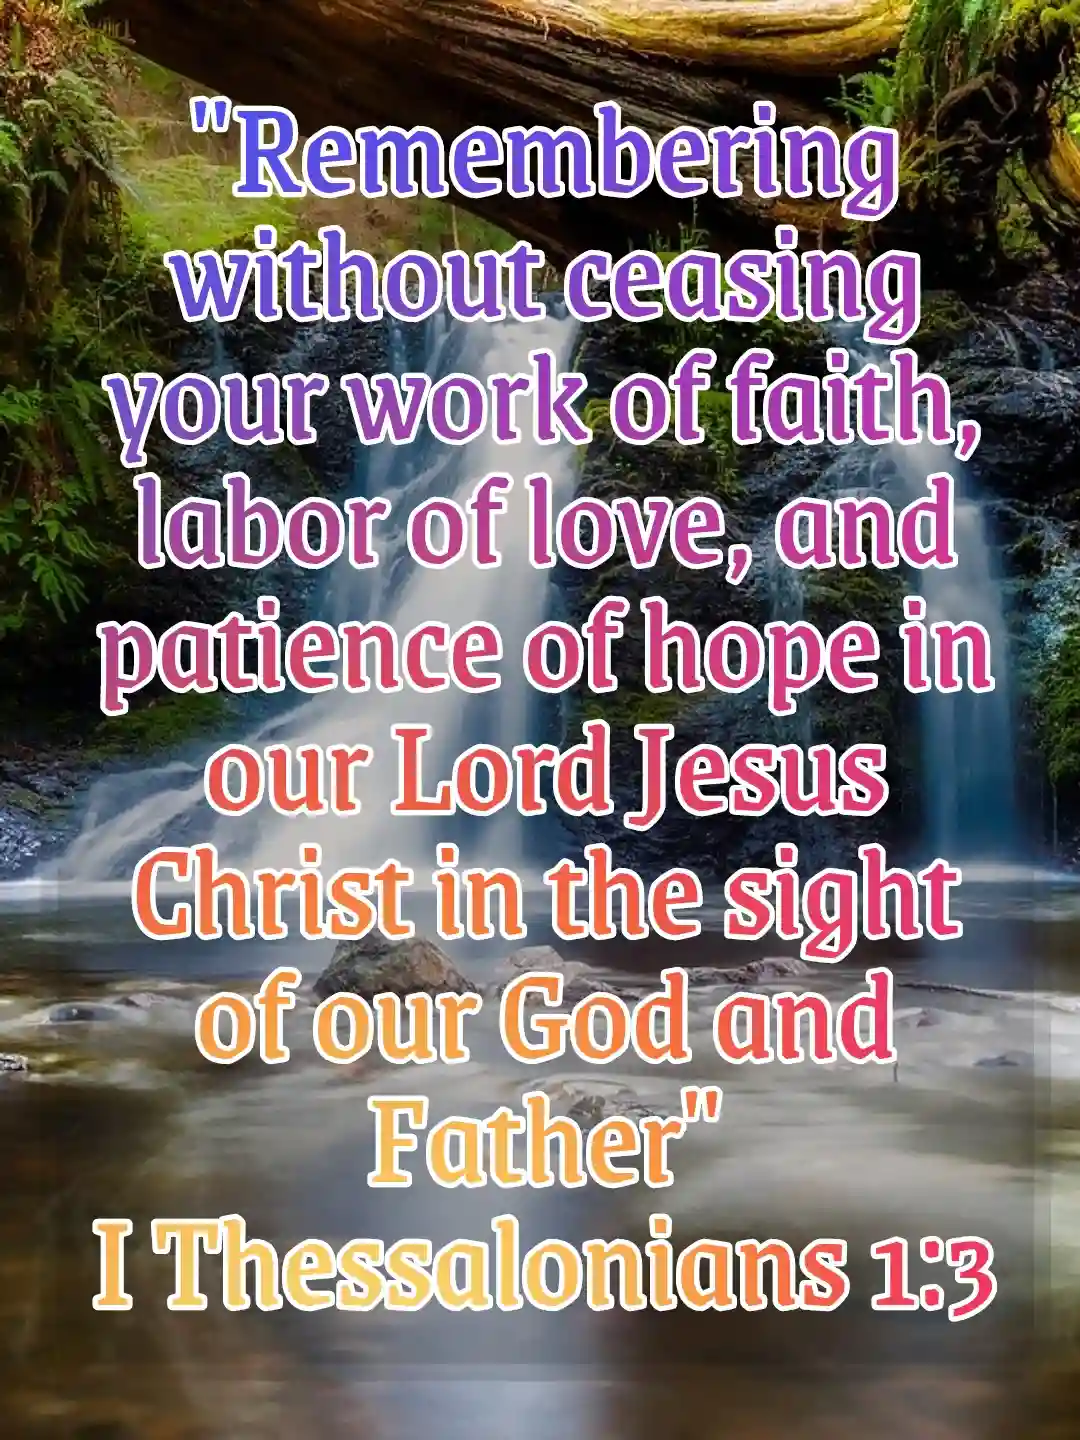 bible verses on faith and hope (1Thessalonians 1:3)